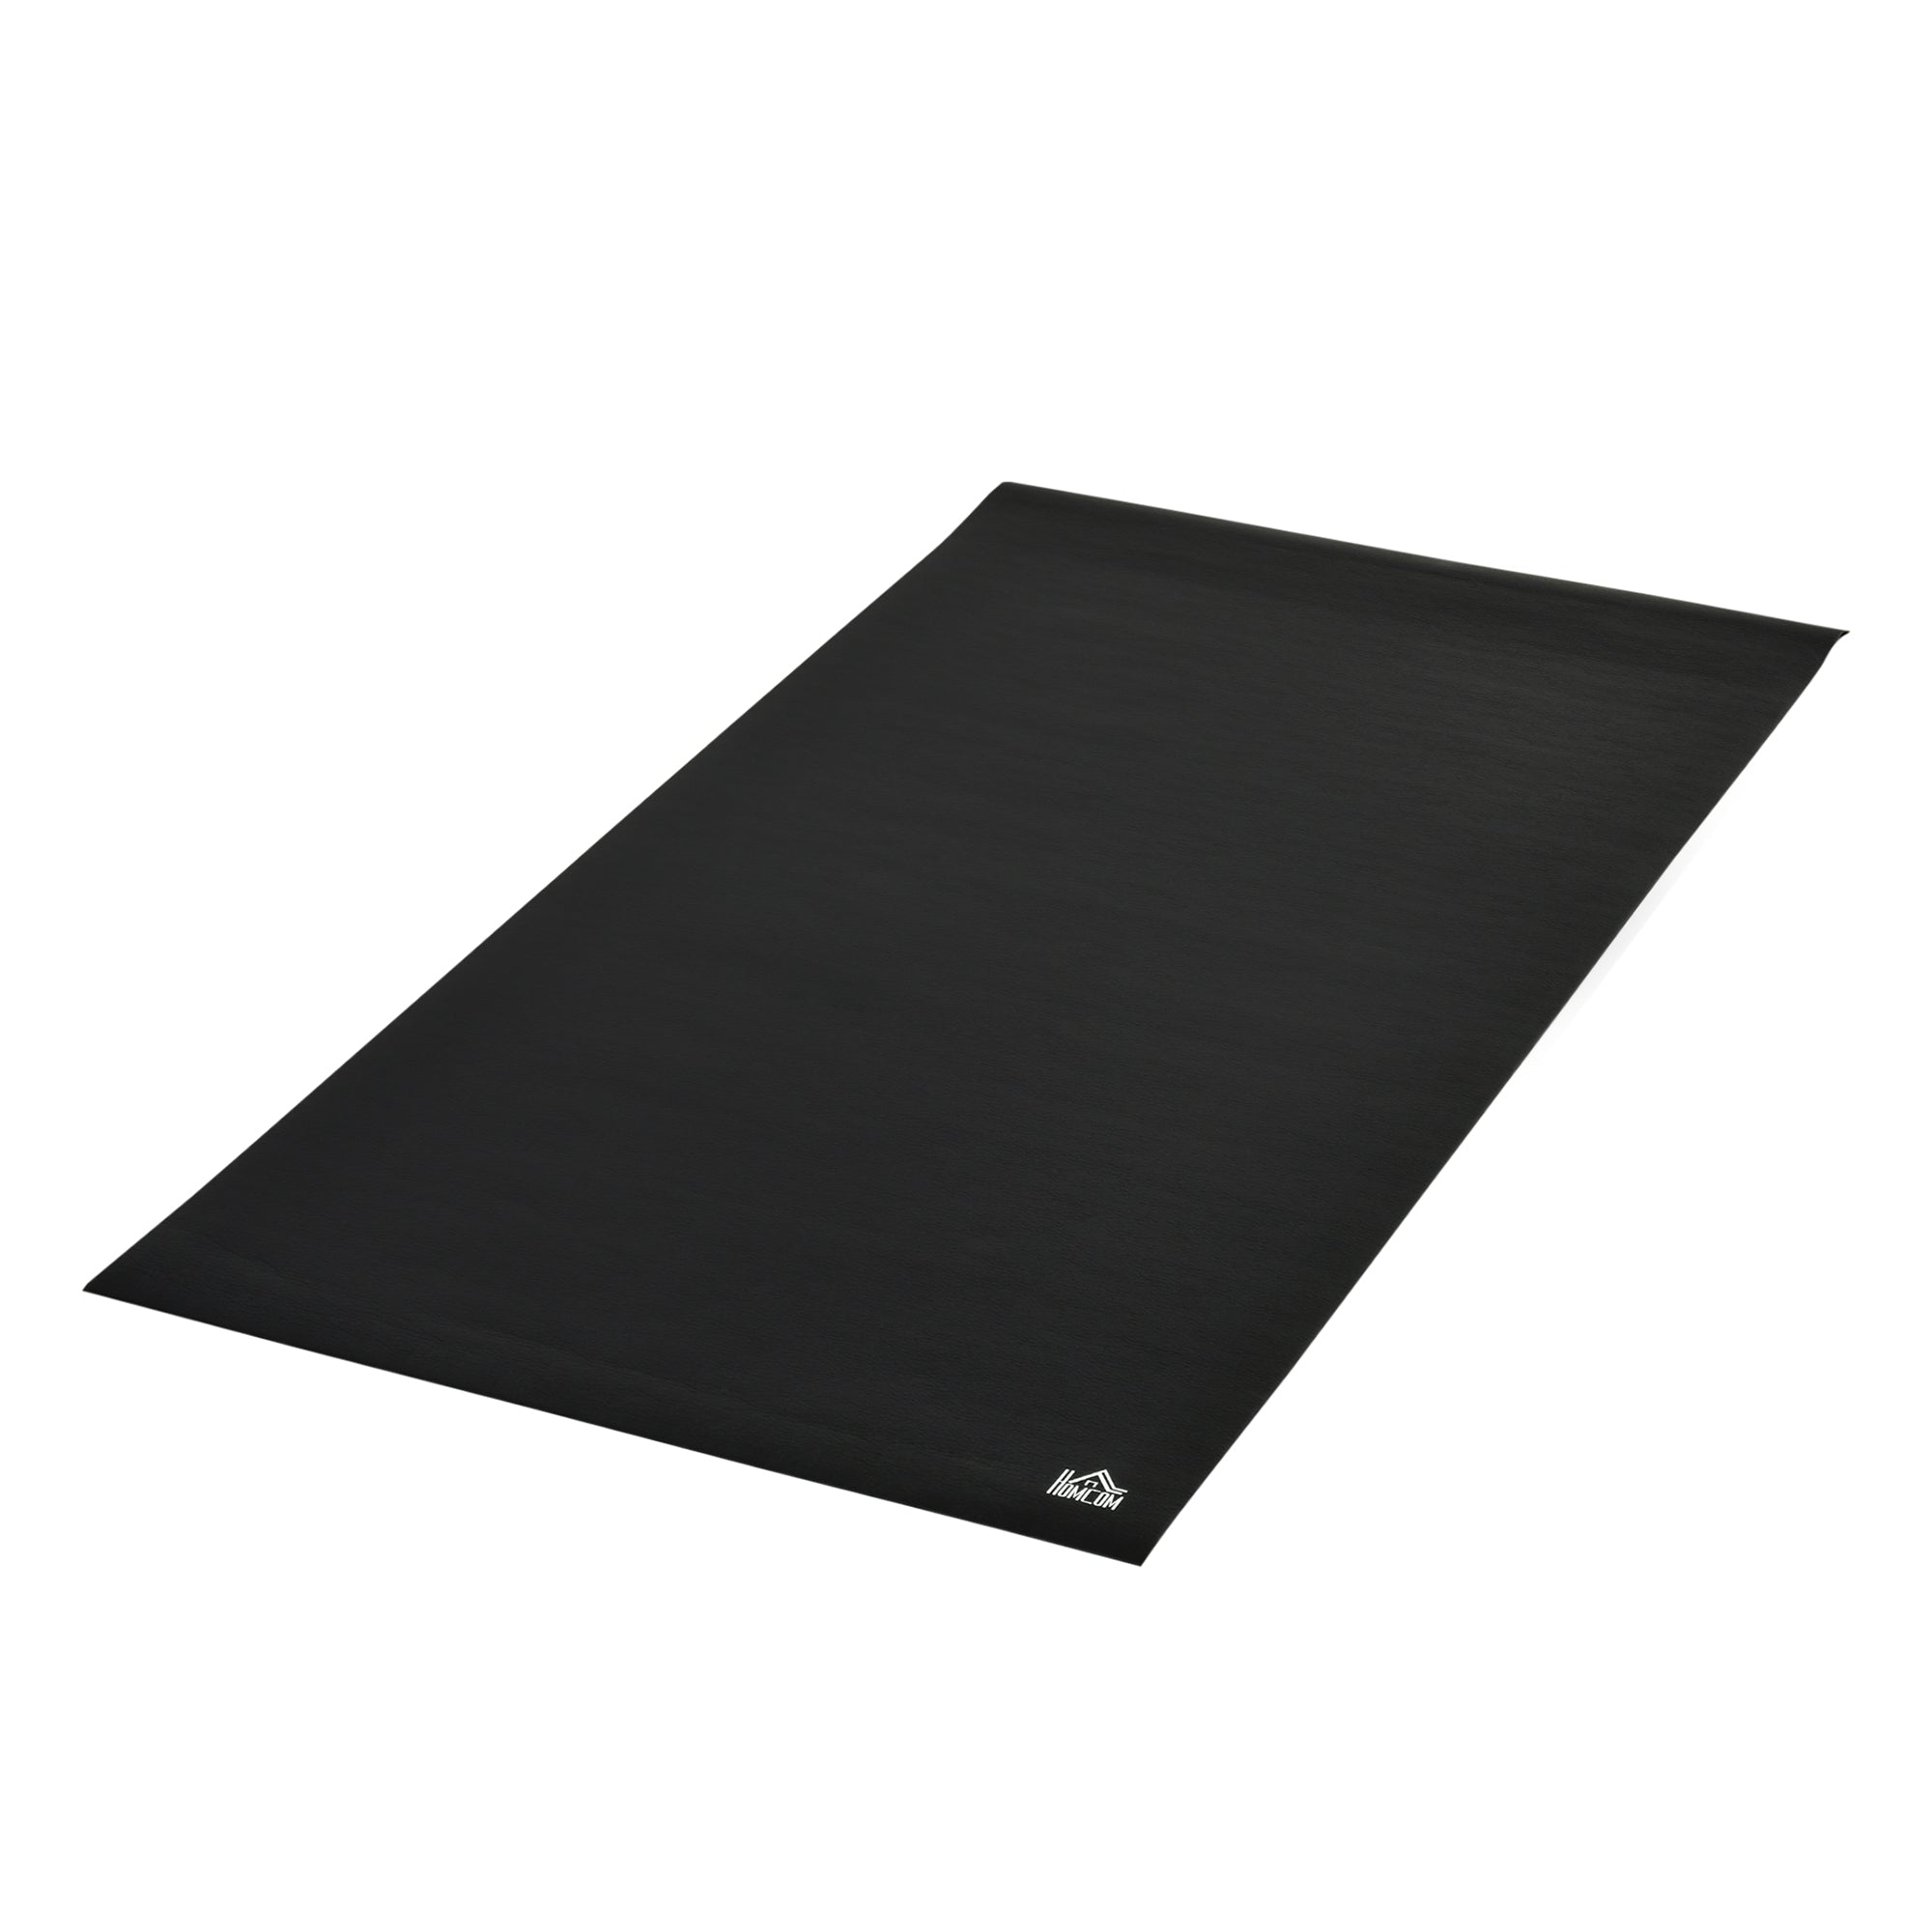 Multi-purpose Exercise Equipment Protection Mat Non-slip Floor Protector Gym Fitness Workout Training Mat 220 x 120cm Tranining - TJ Hughes